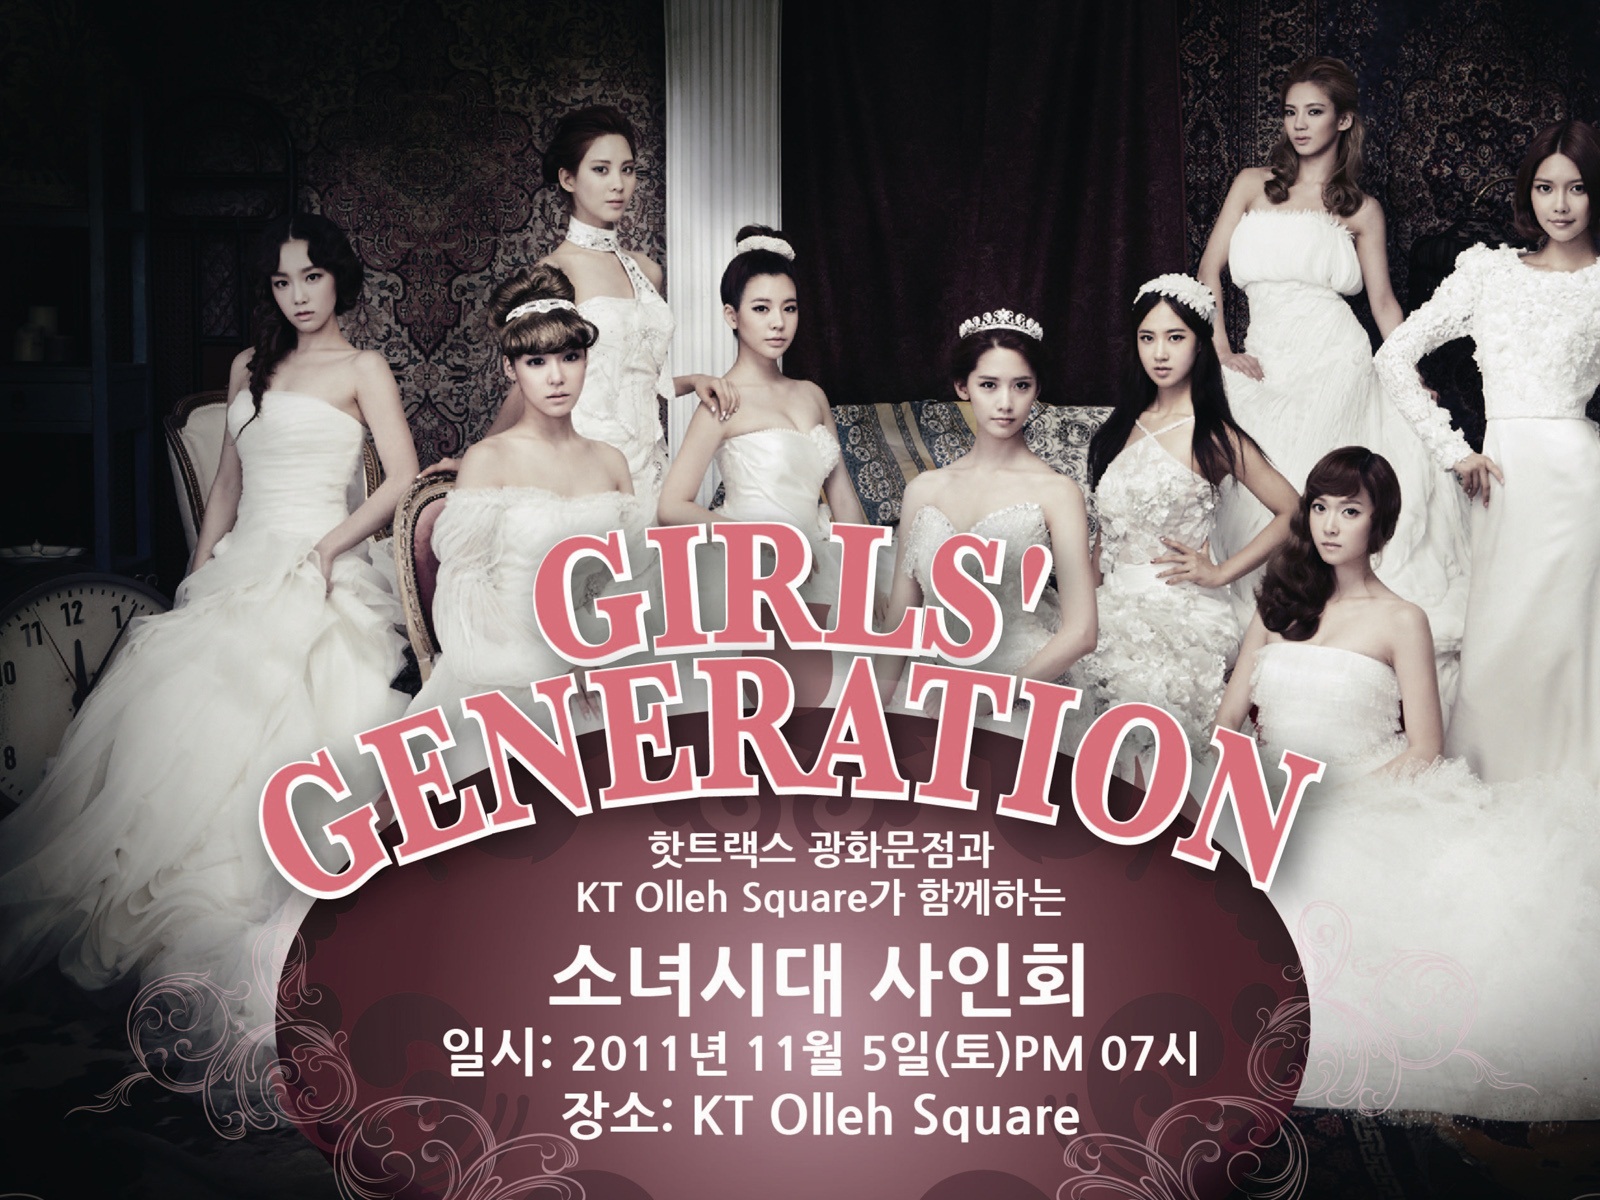 Girls Generation latest HD wallpapers collection #8 - 1600x1200